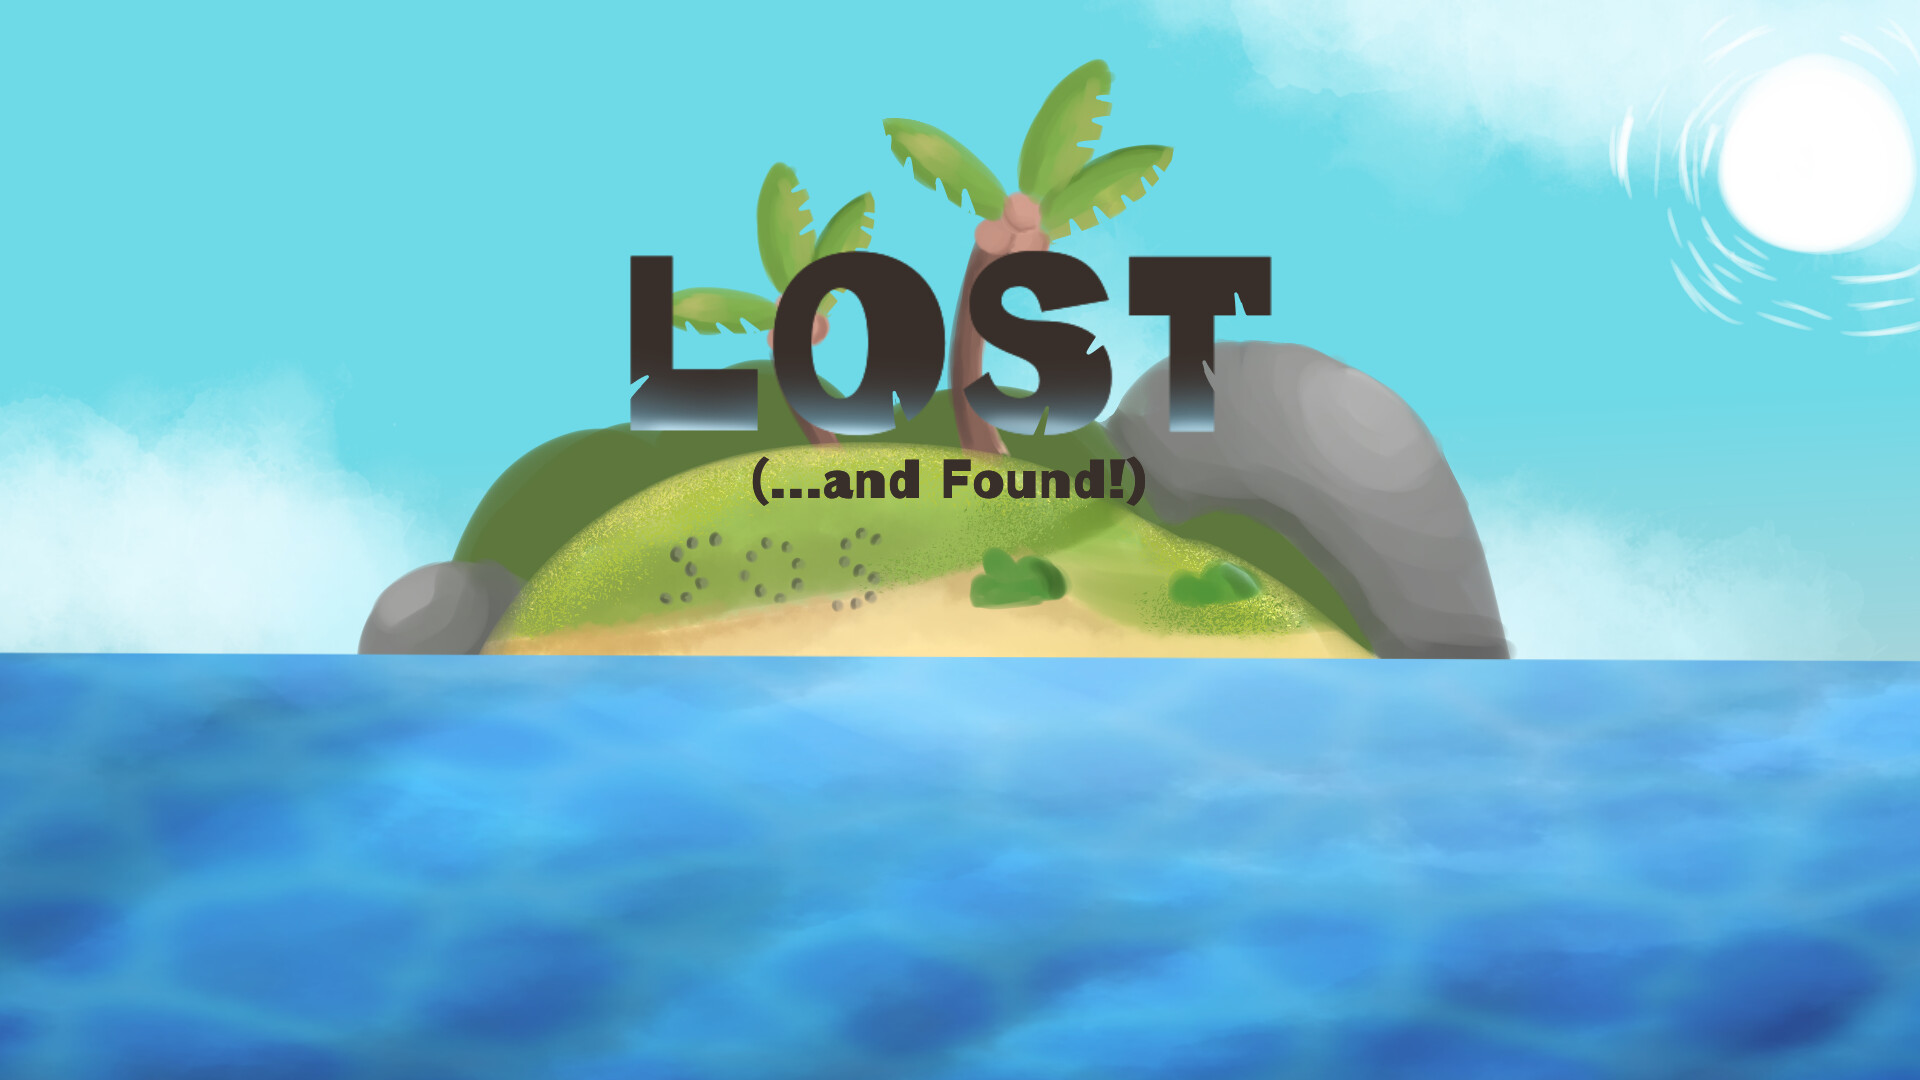 LOST... (and Found)